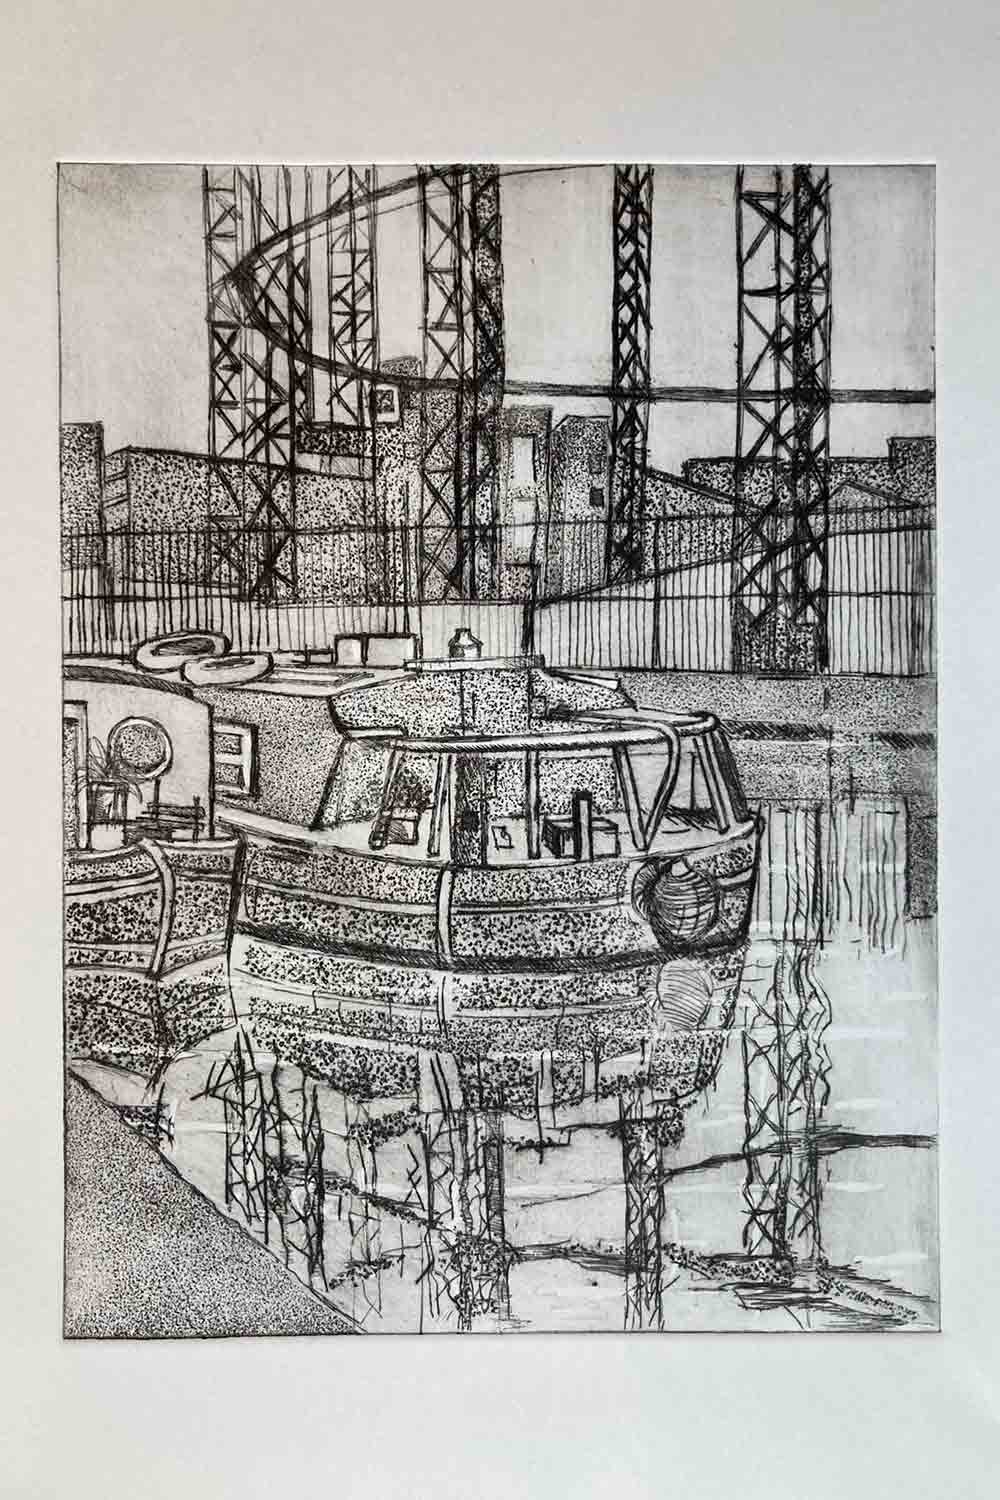 Black and white dry point print of the Regent's Canal and Bethnal Green gas holders in the background.